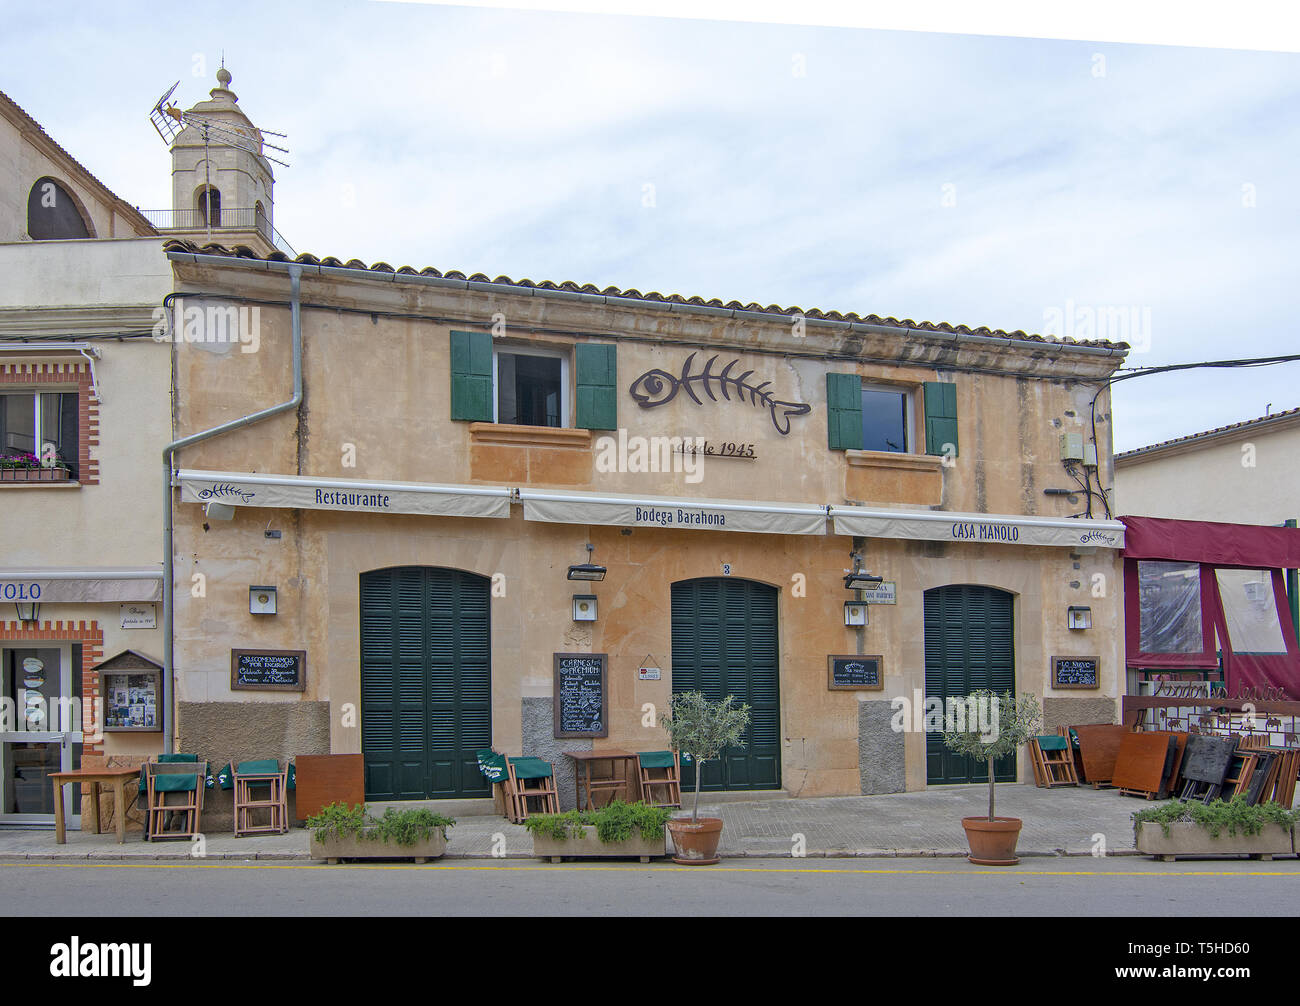 SES SALINES, MALLORCA, SPAIN - APRIL 15, 2019: Bodega Barahona front street view in central city on an overcast day in the beginning of tourist season Stock Photo